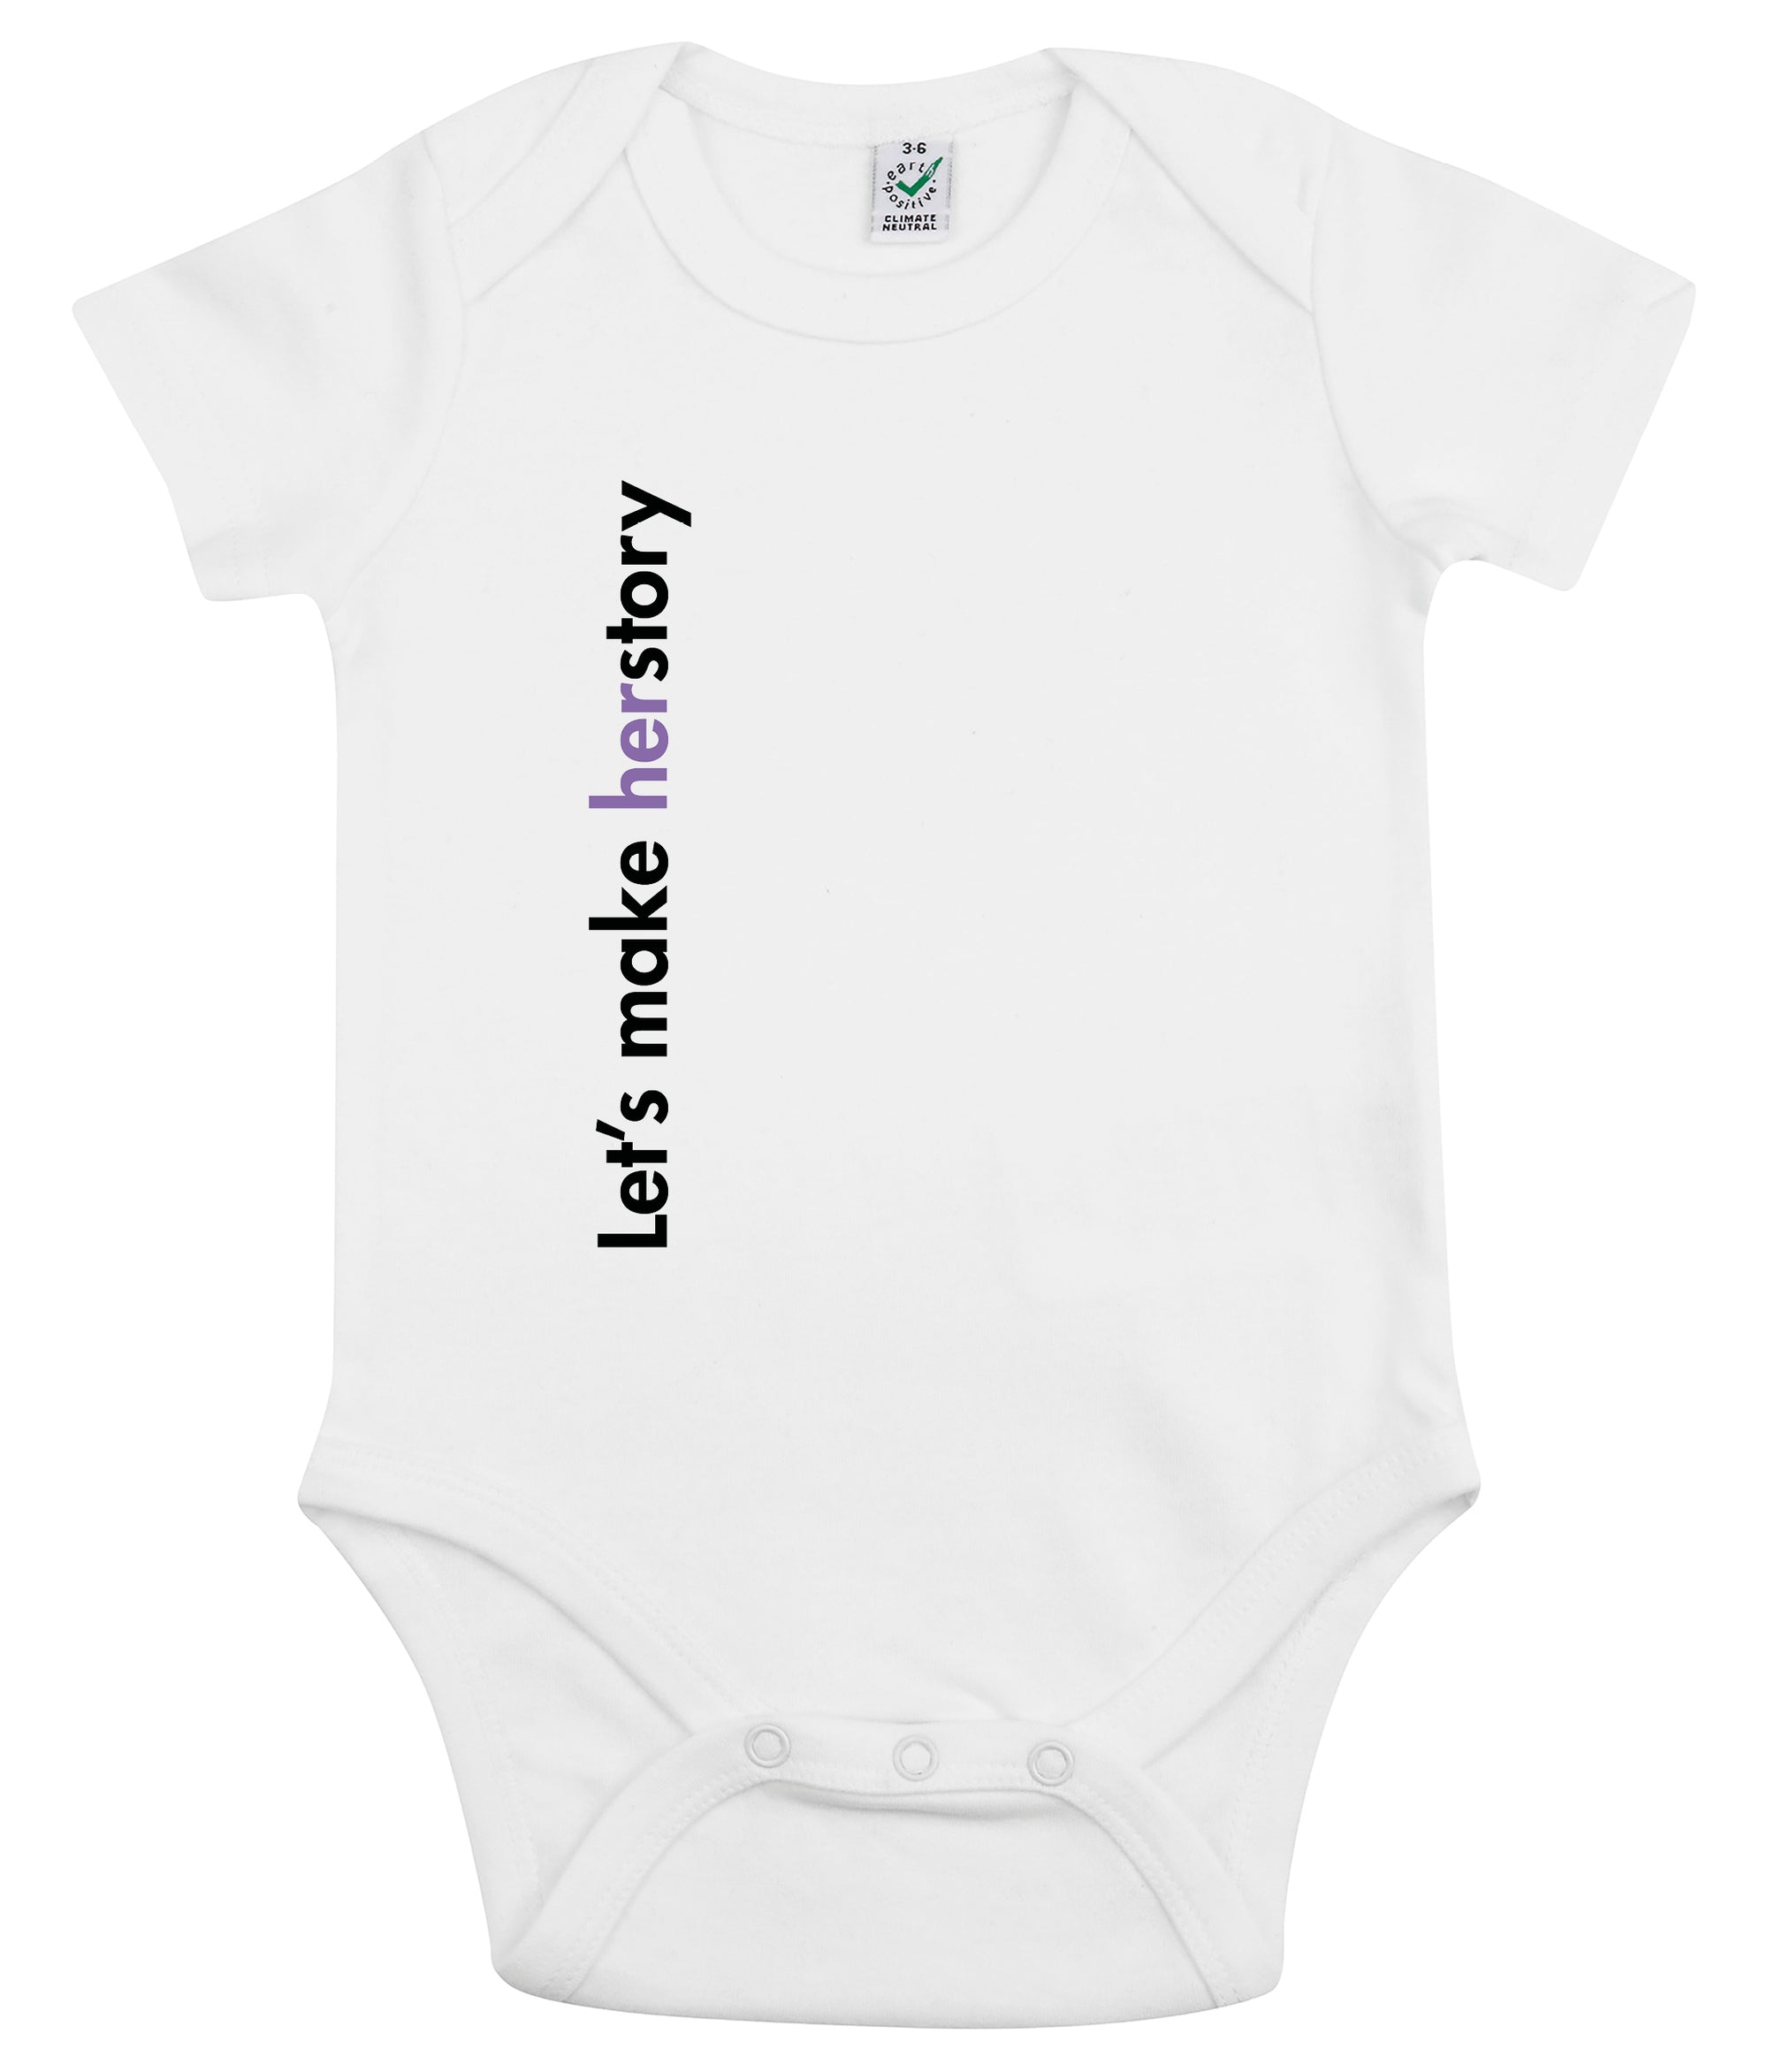 Let's Make Herstory Organic Combed Cotton Babygrow White